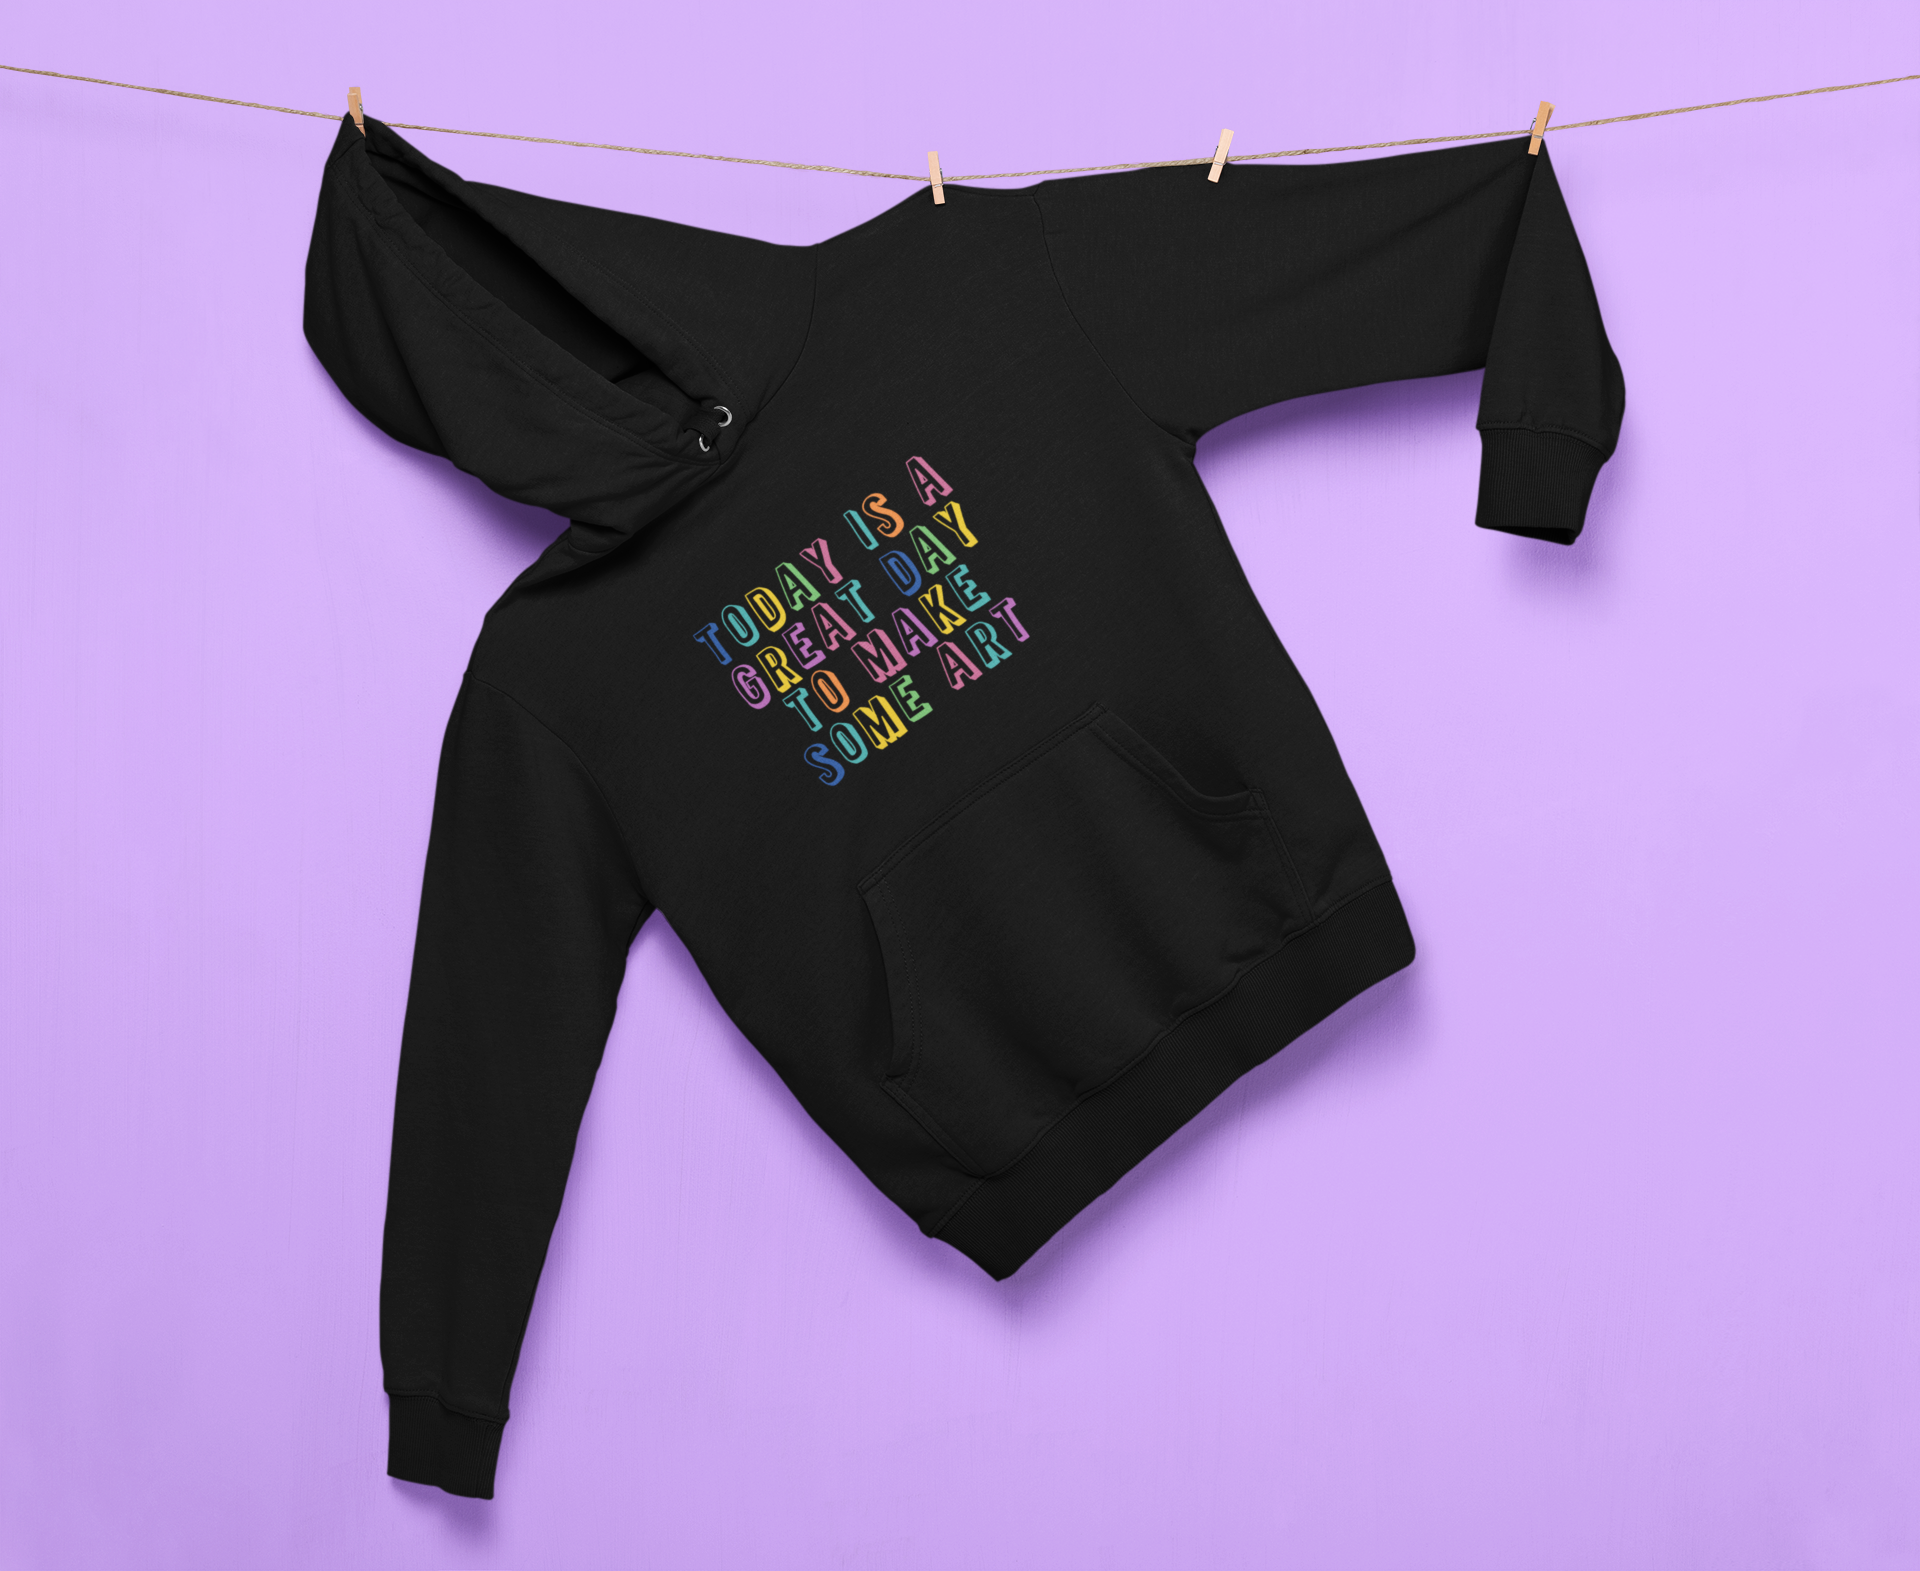 Today Is Great A Day Hoodie